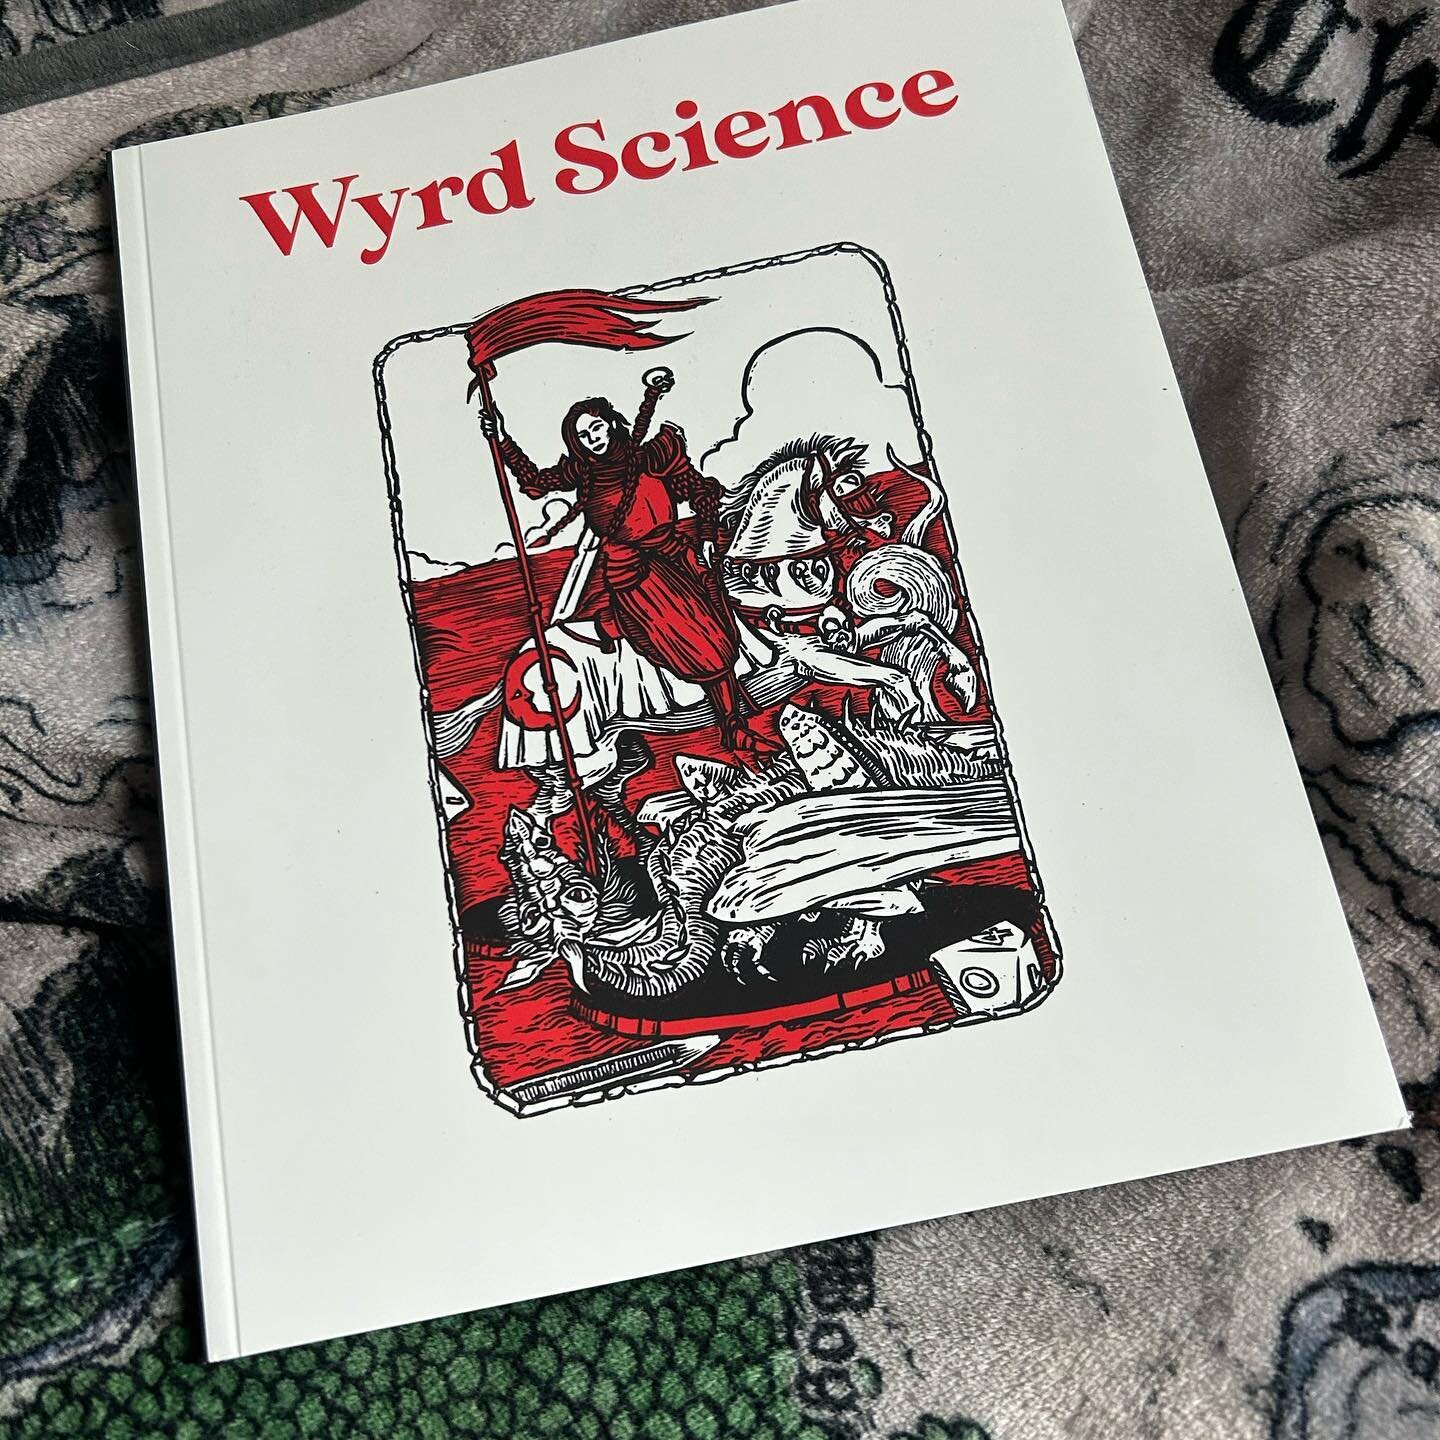 If you are a fan of TTRPGs, the latest volume of @wyrd.science is now out and we are in it talking about podcasts and love of different RPGs!

Just got our print copy and honestly, made our month! 

Get yours via link in bio! 

#TTRPG #RPG #magazine 